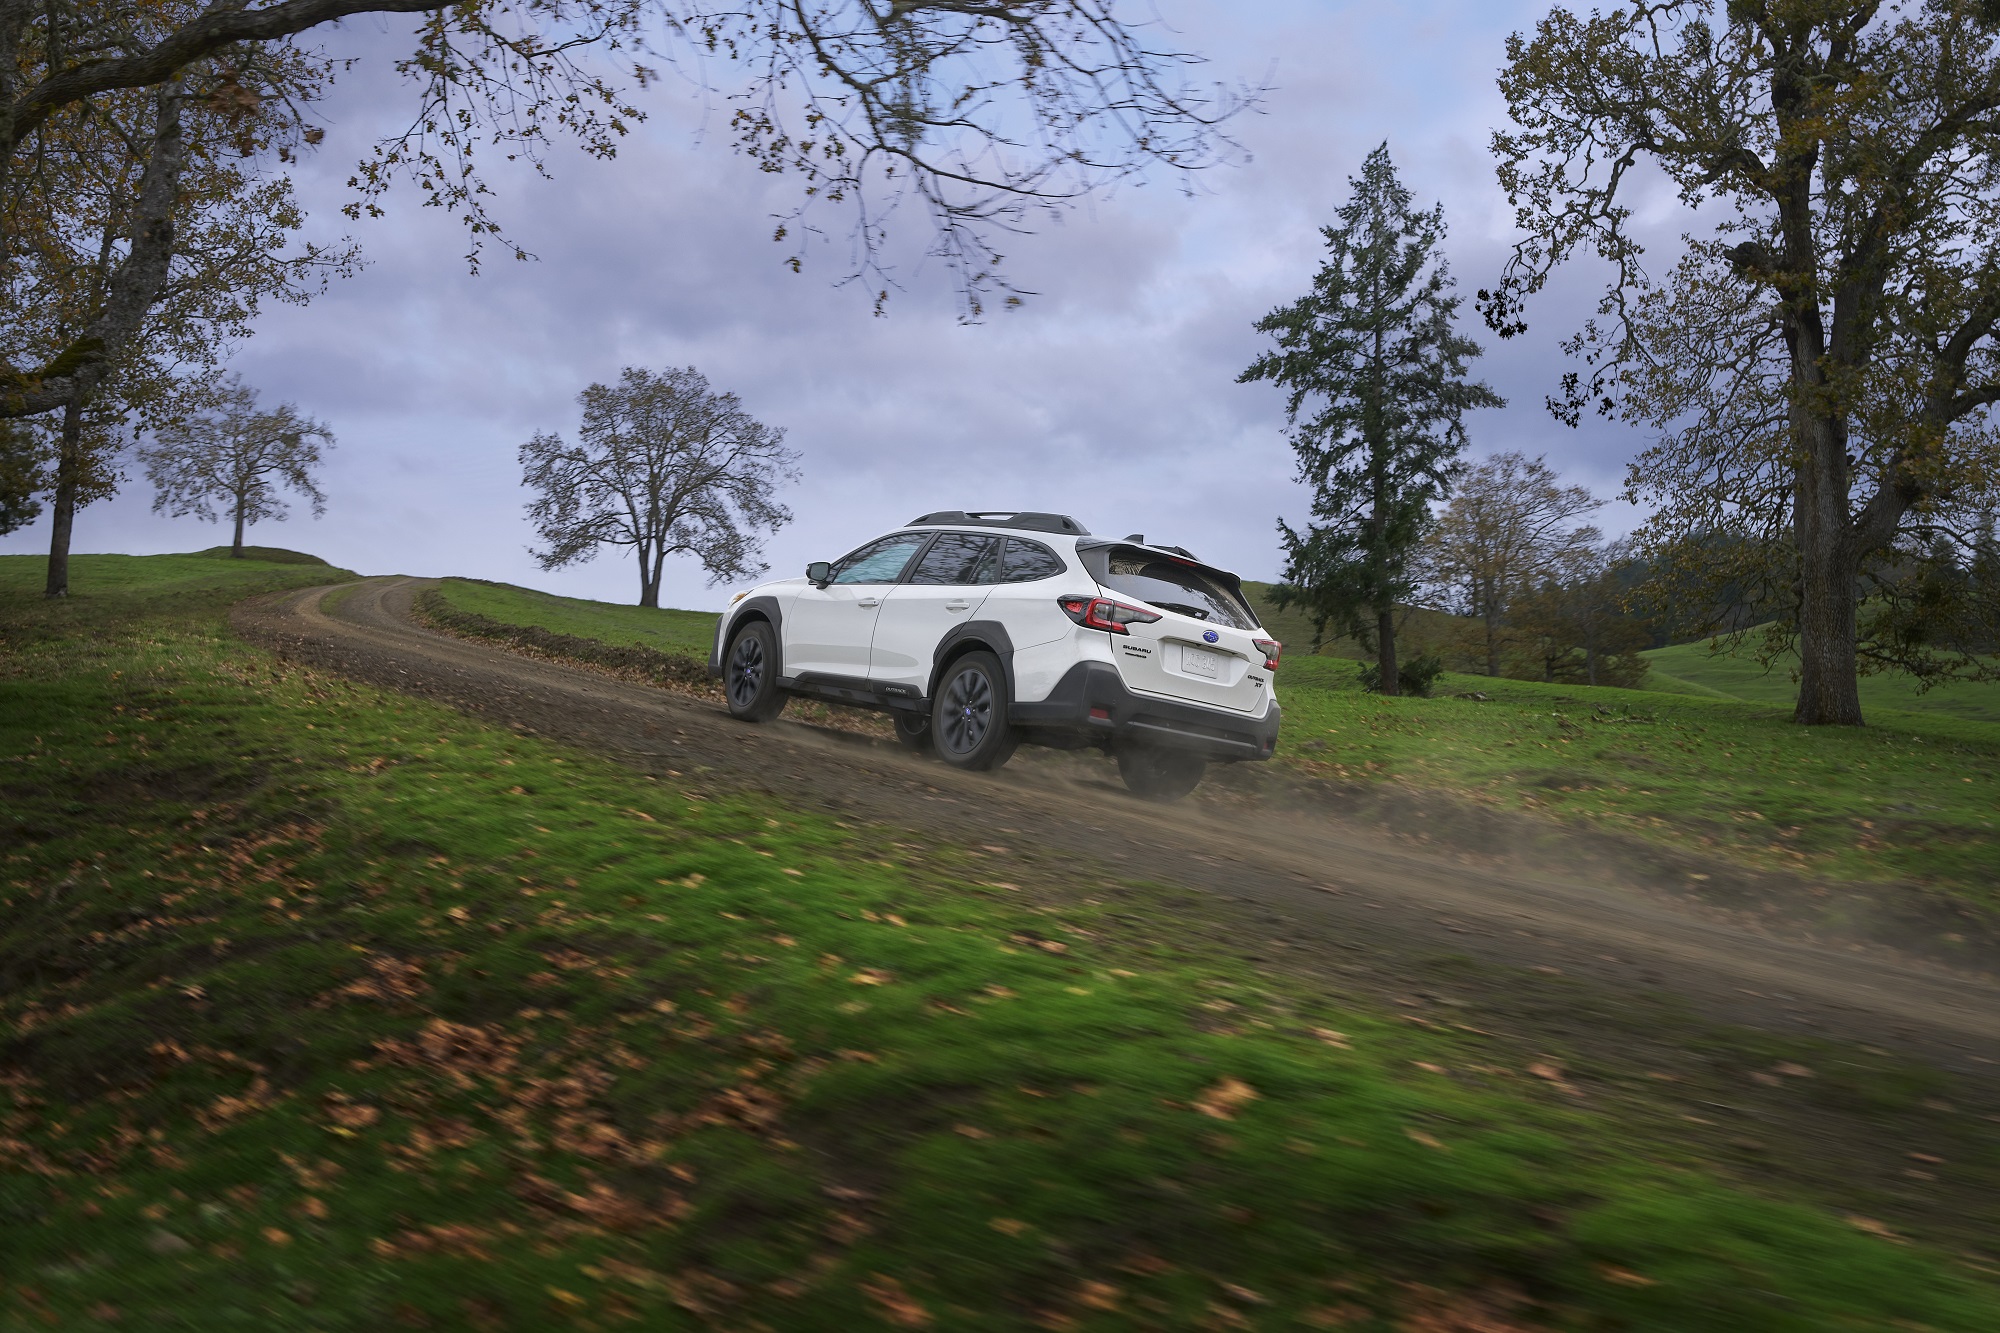 The Subaru Outback, like the BMW X2, is an AWD-equipped option for snow driving.